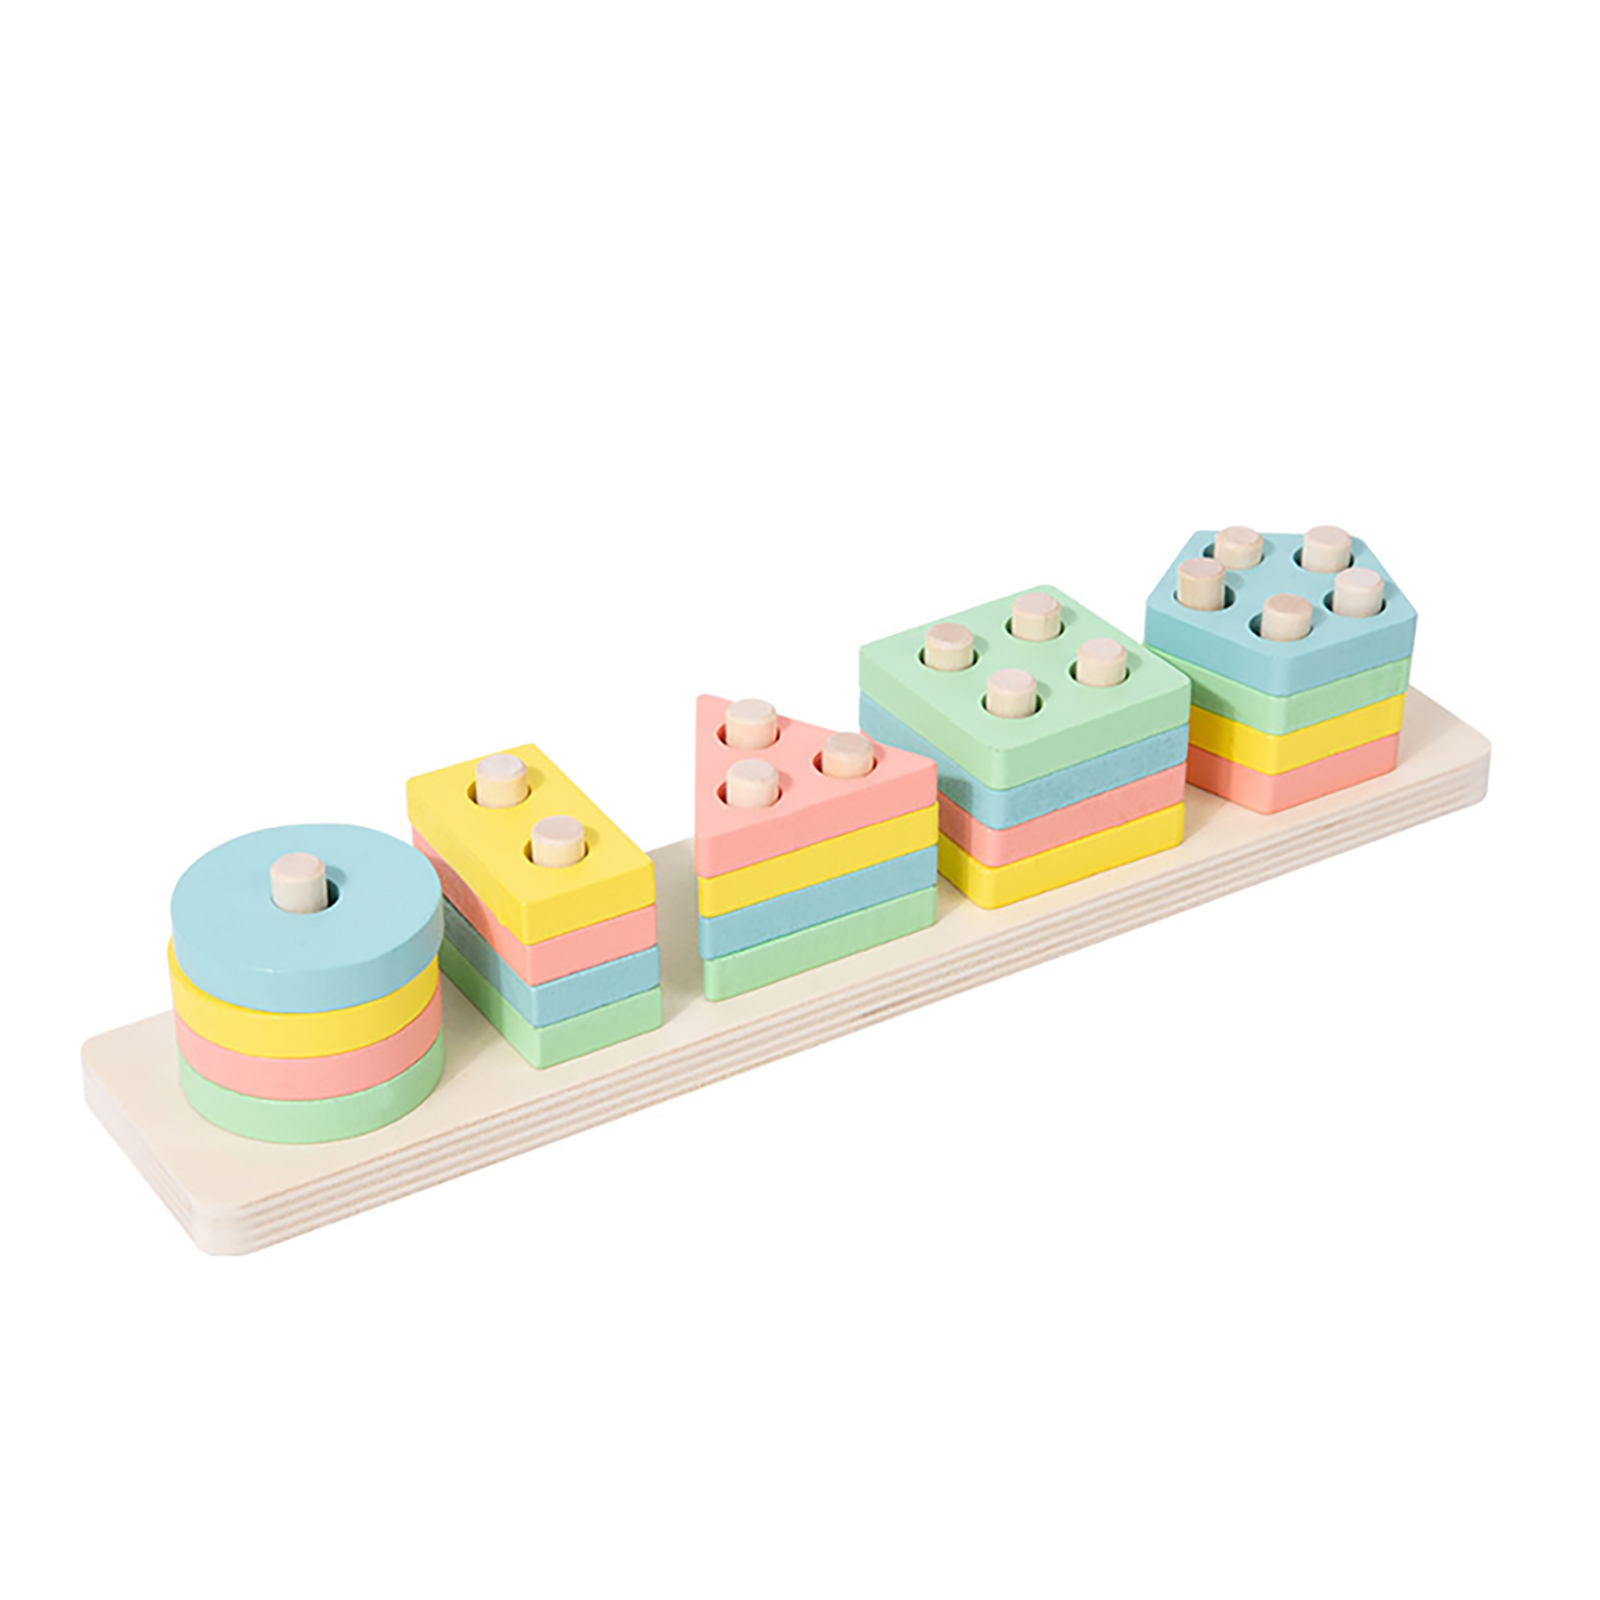 Kids Wooden Sorting Stacking Toys For Toddlers Shape Color Matching Building Blocks Educational Toys Gifts For Boys Girls